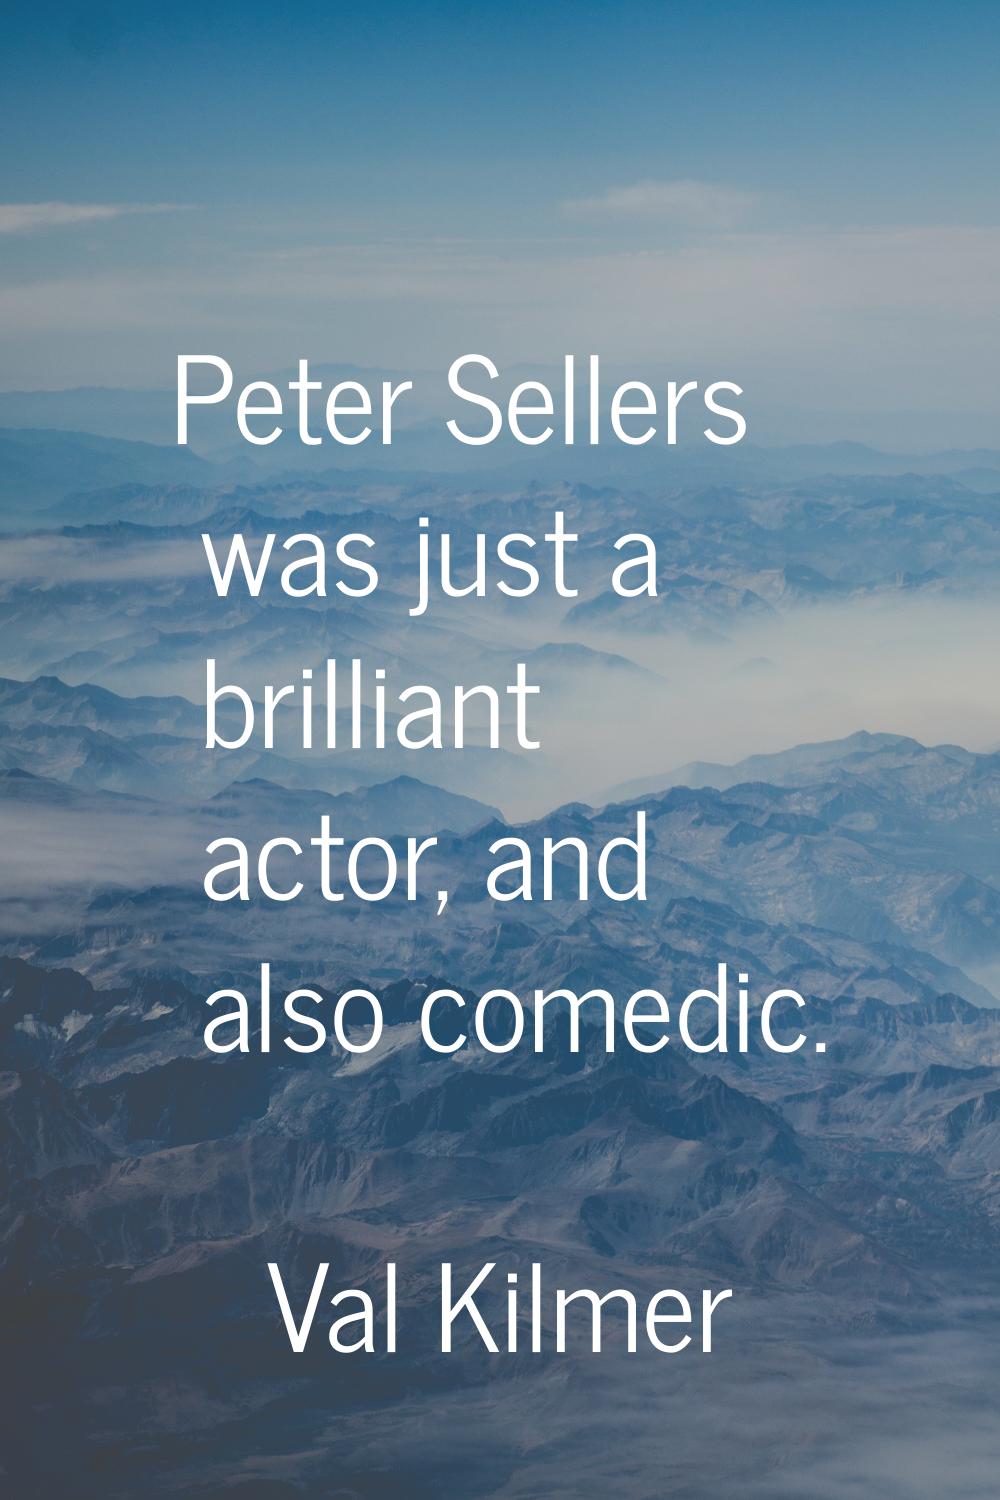 Peter Sellers was just a brilliant actor, and also comedic.